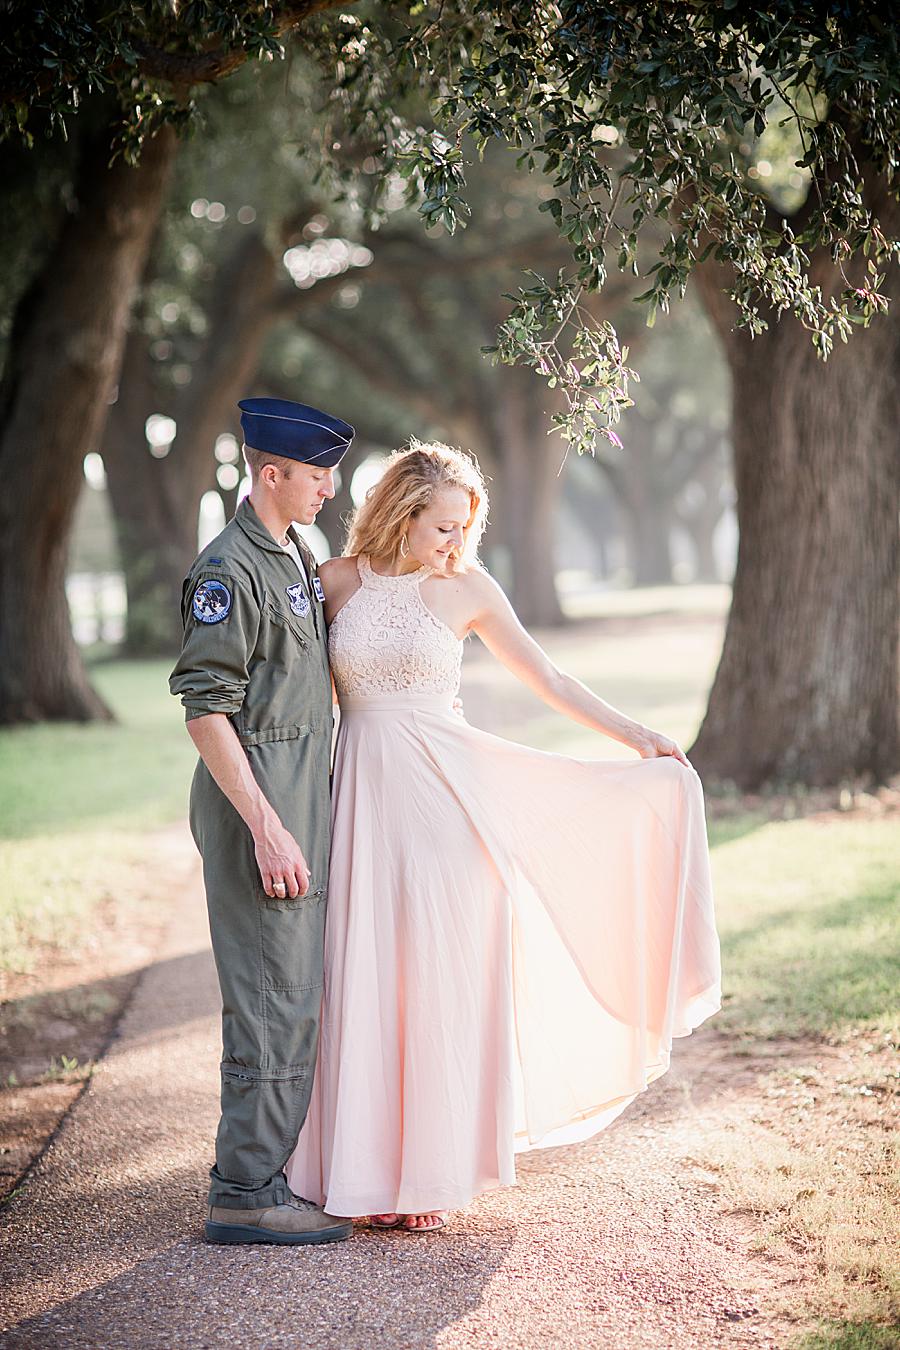 Flowy skirt at this 2018 favorite engagements by Knoxville Wedding Photographer, Amanda May Photos.